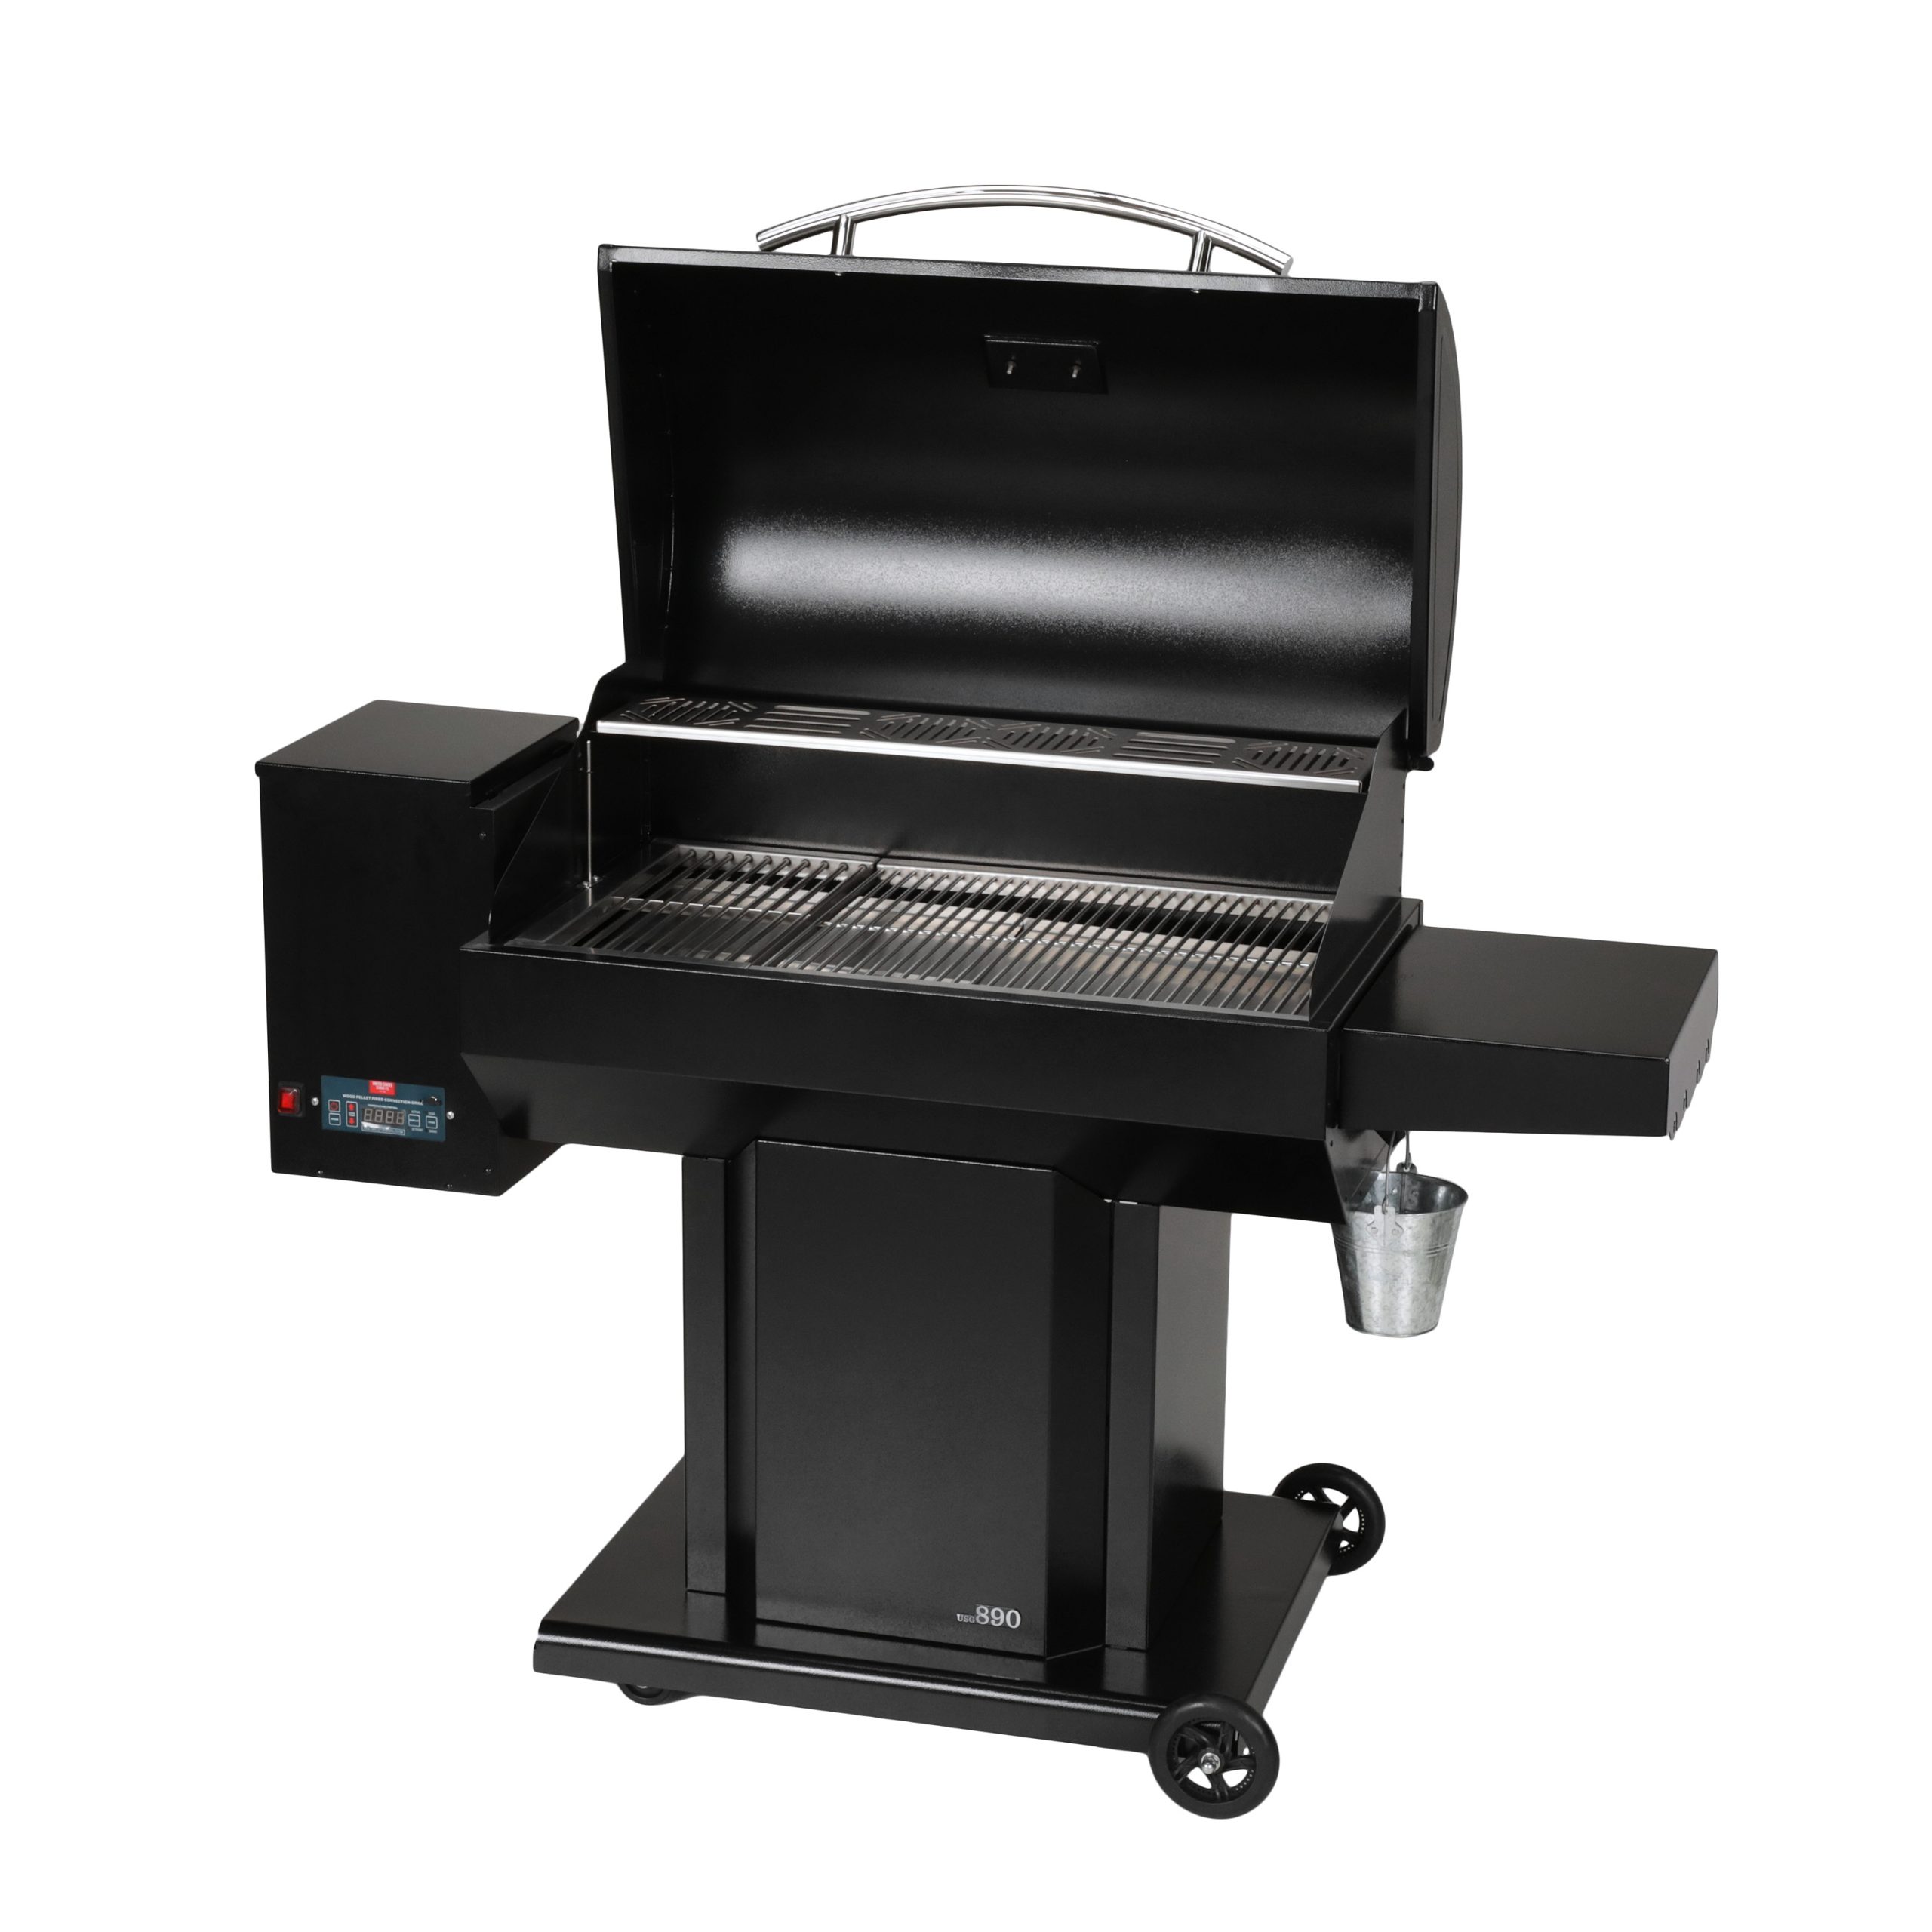 The Irondale USG890 Wood Pellet Grill